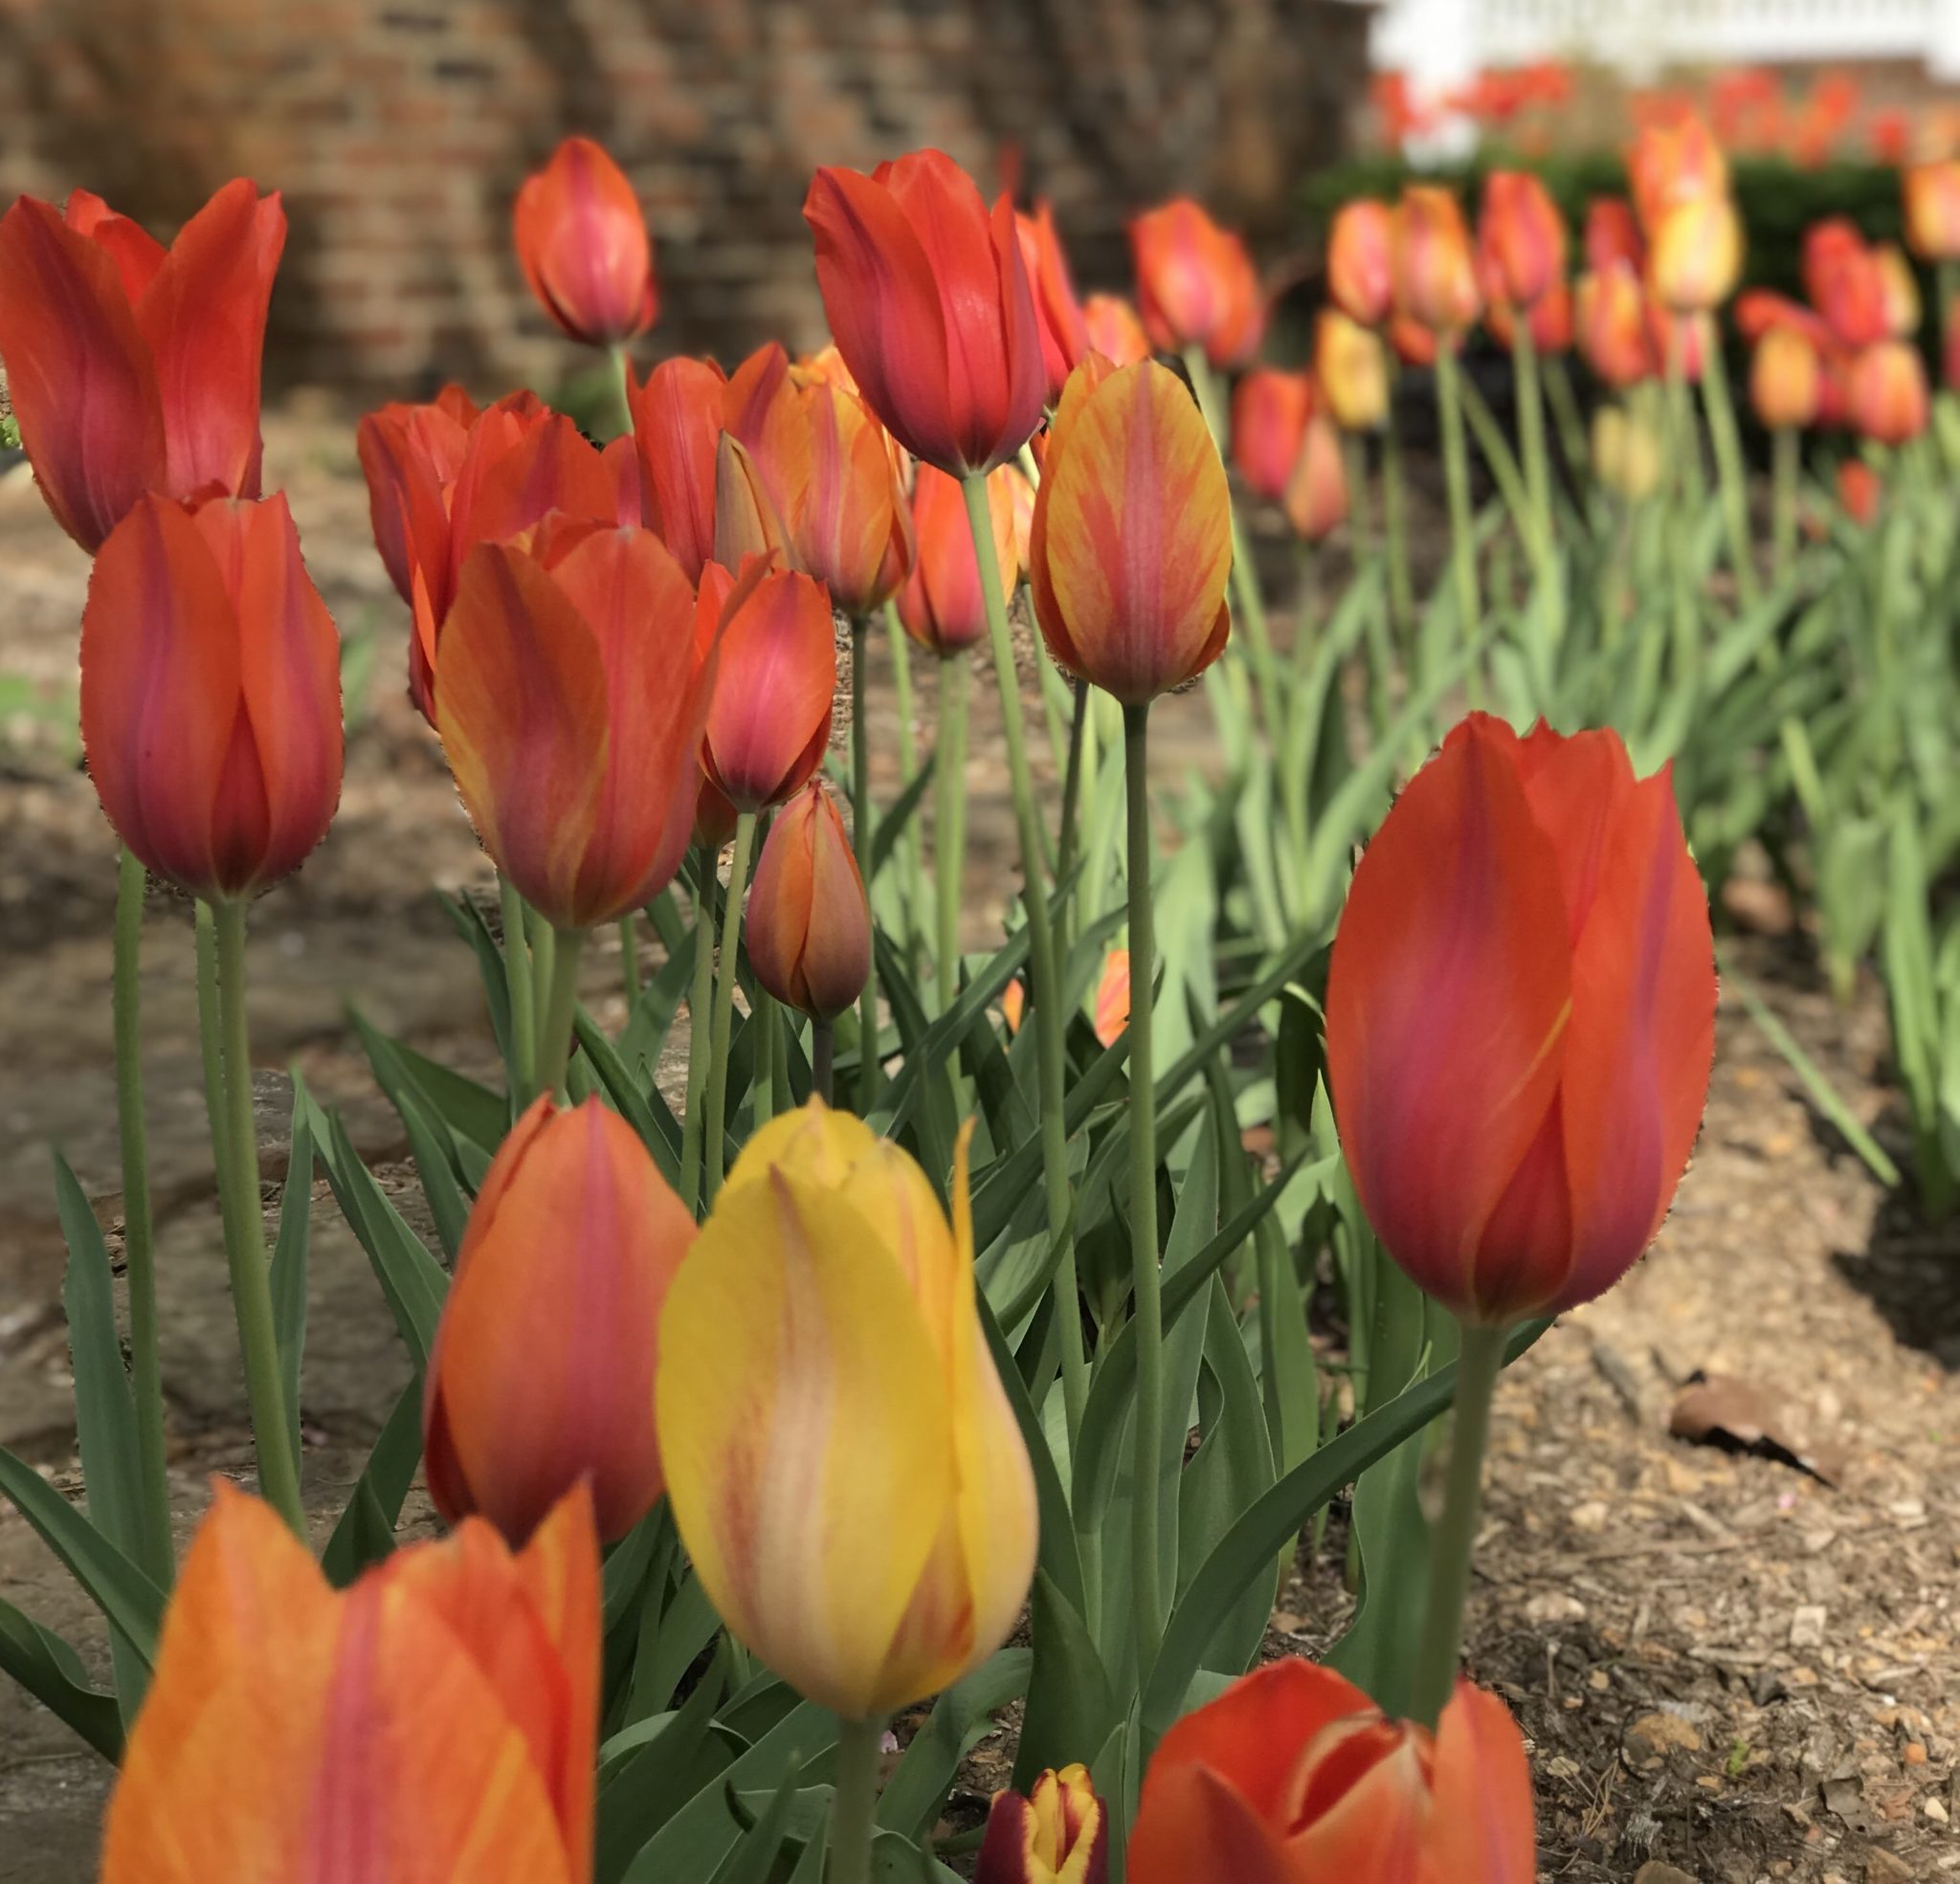 5 Things I’ve Learned From Designing with Tulips – P. Allen Smith